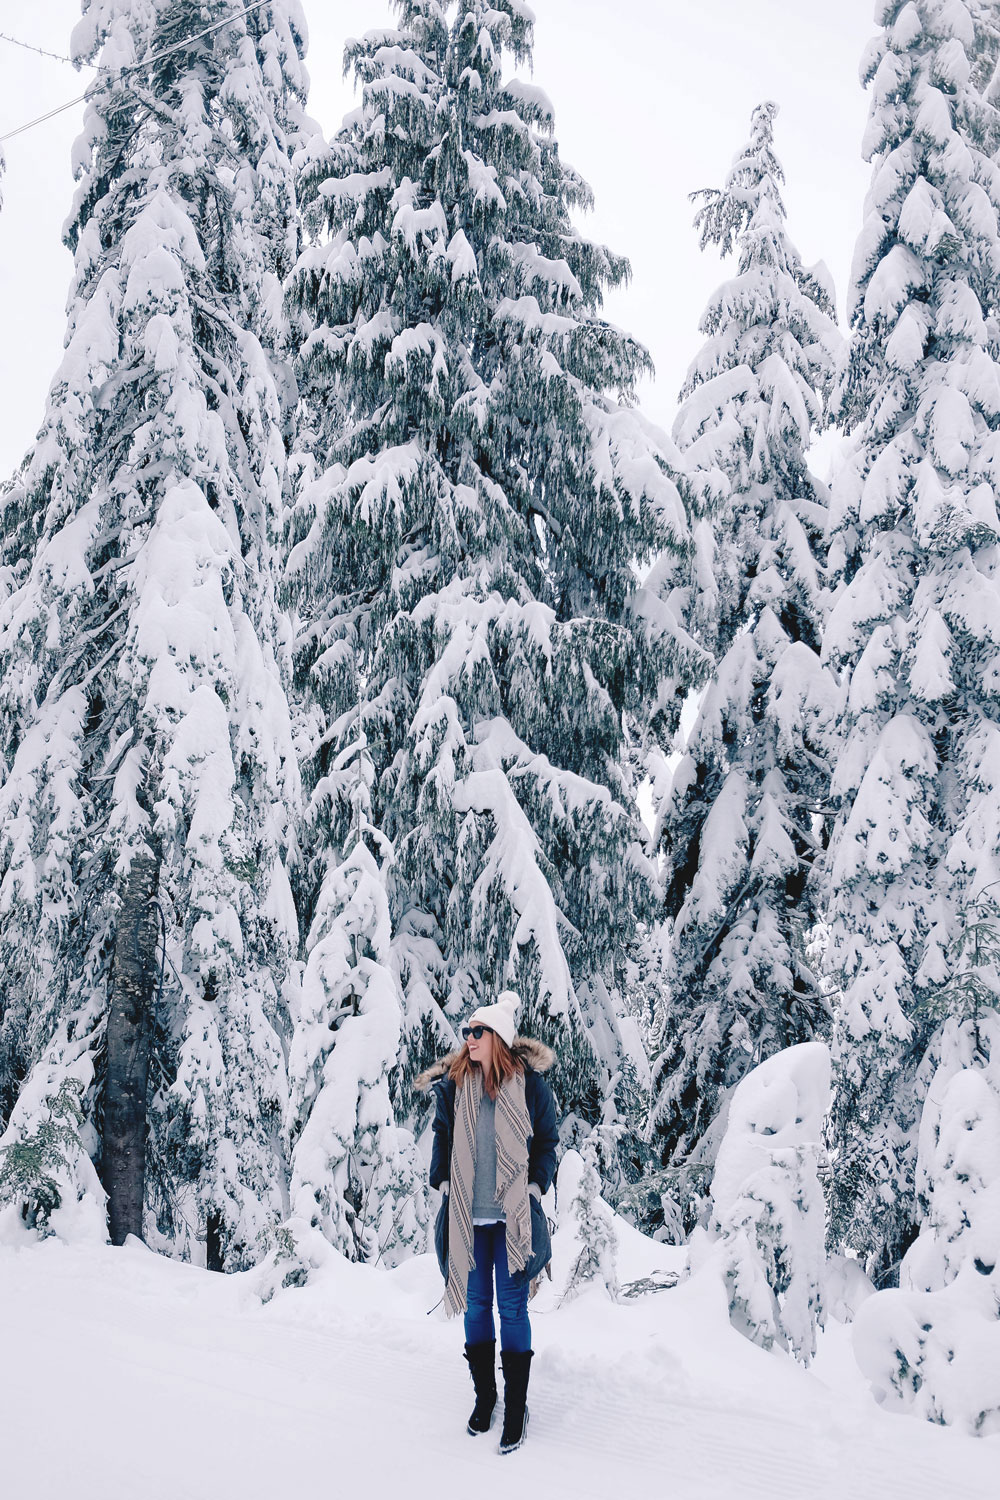 Best winter outfit ideas in the snow in Aritzia Community parka, James jeans skinny jeans, White and Warren cashmere sweater, Aritzia blanket scarf, Hershel beanie, Sorel snow boots styled by To Vogue or Bust at Grouse Mountain, Vancouver